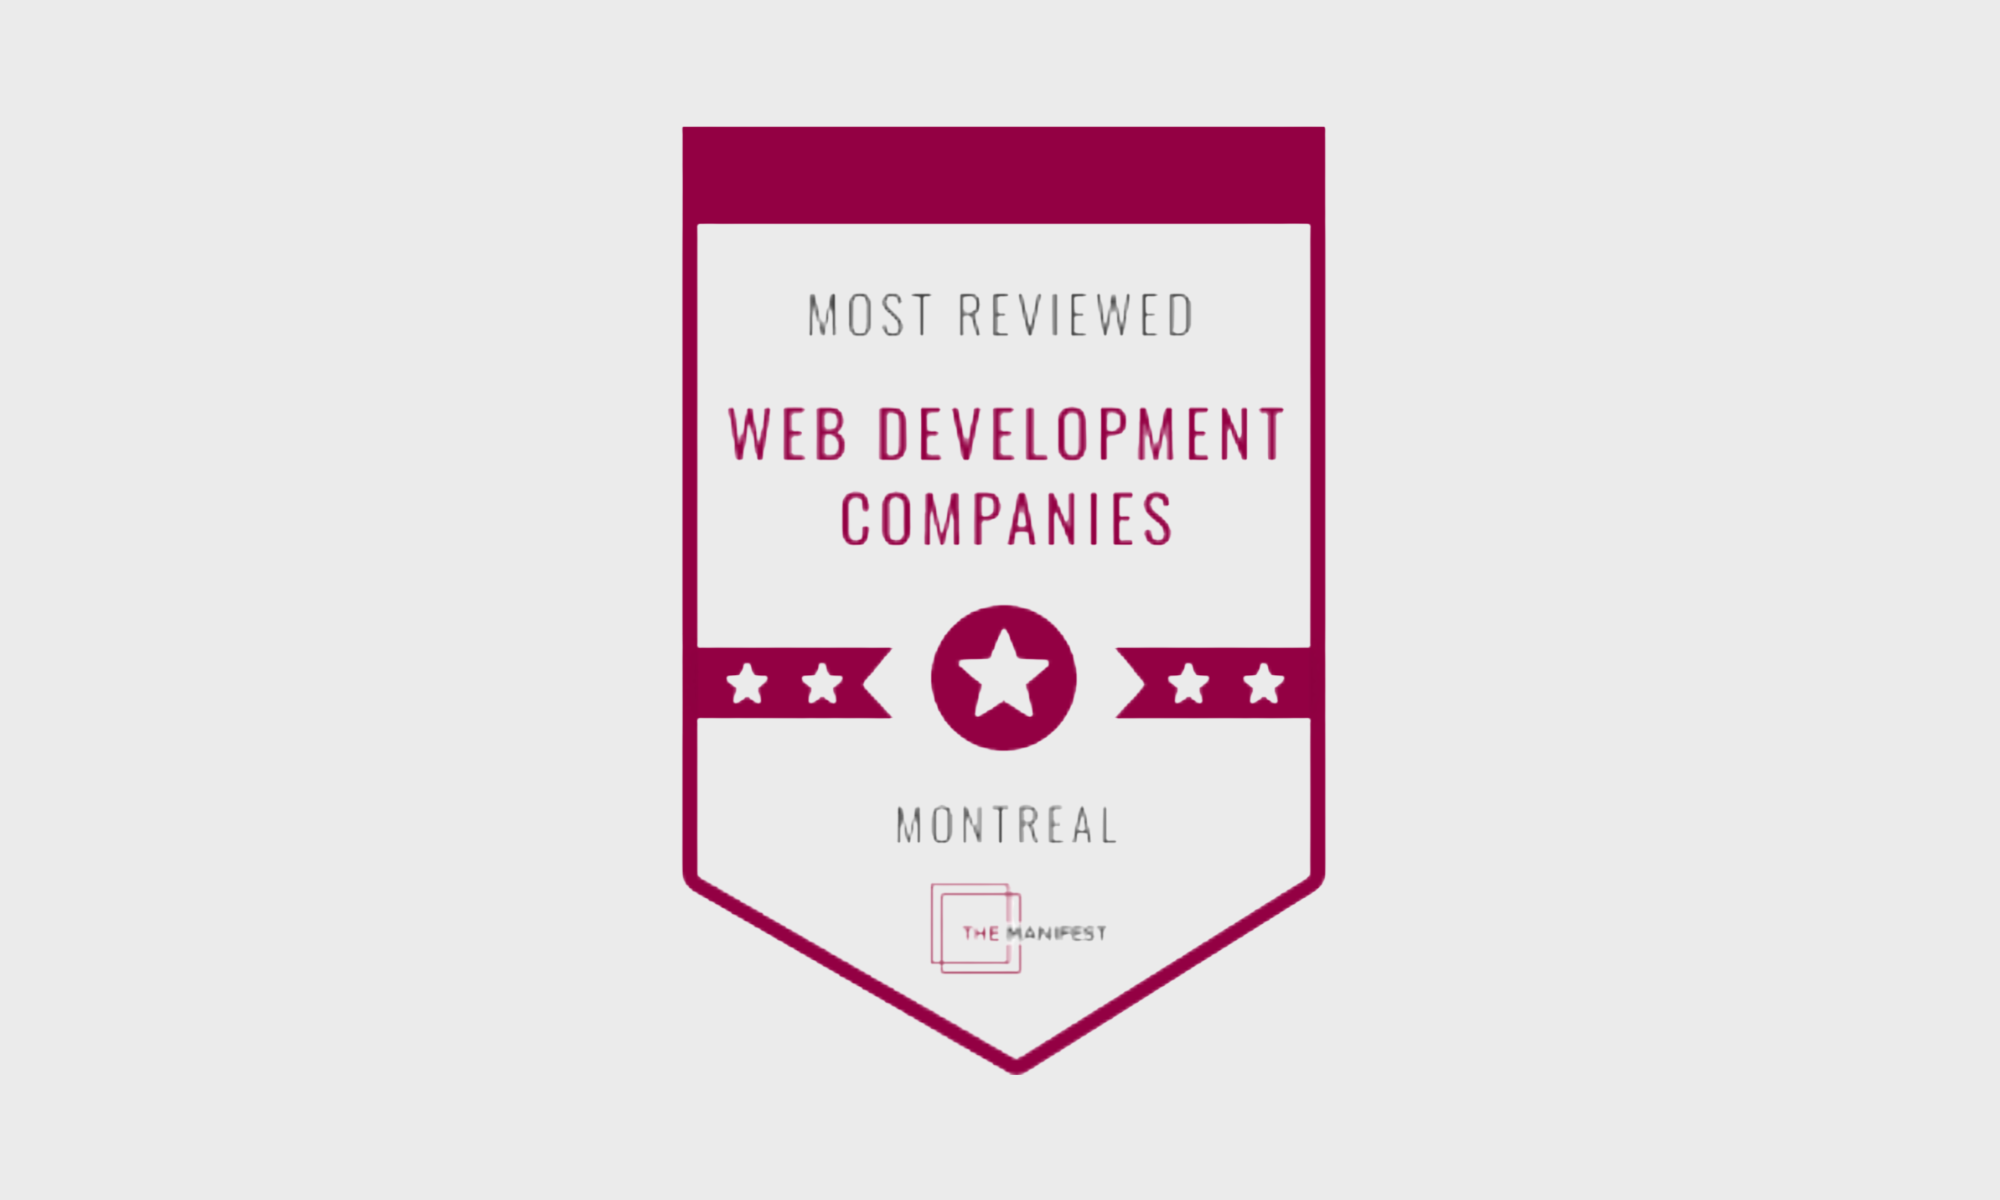 Most-Reviewed Web Development Companies in Montreal